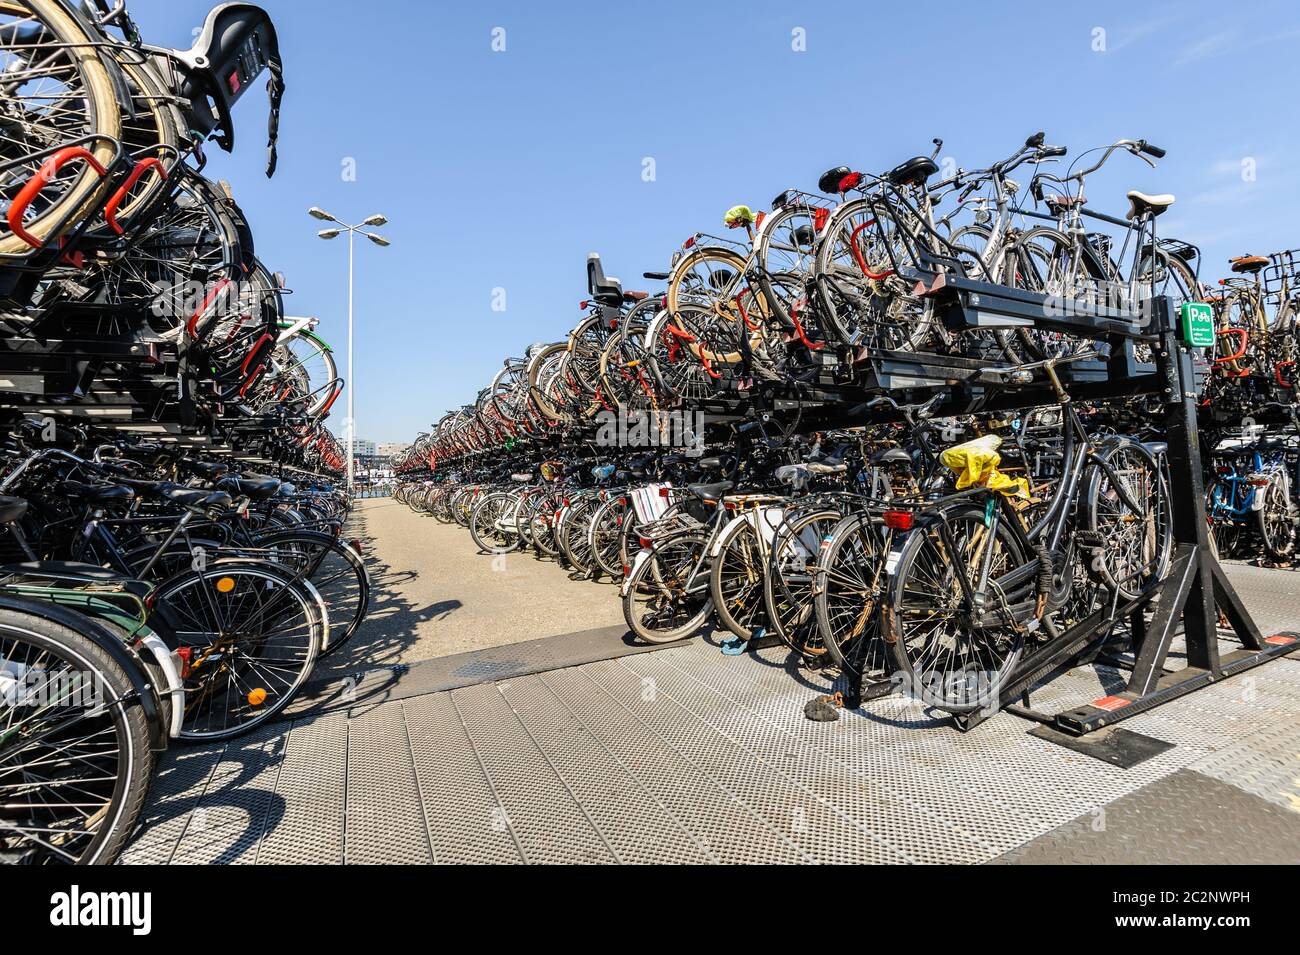 AMSTERDAM, HOLLAND - AUGUST 01: Amsterdam Central station. Many bicycles parked in front of the Central station on August 01, 20 Stock Photo